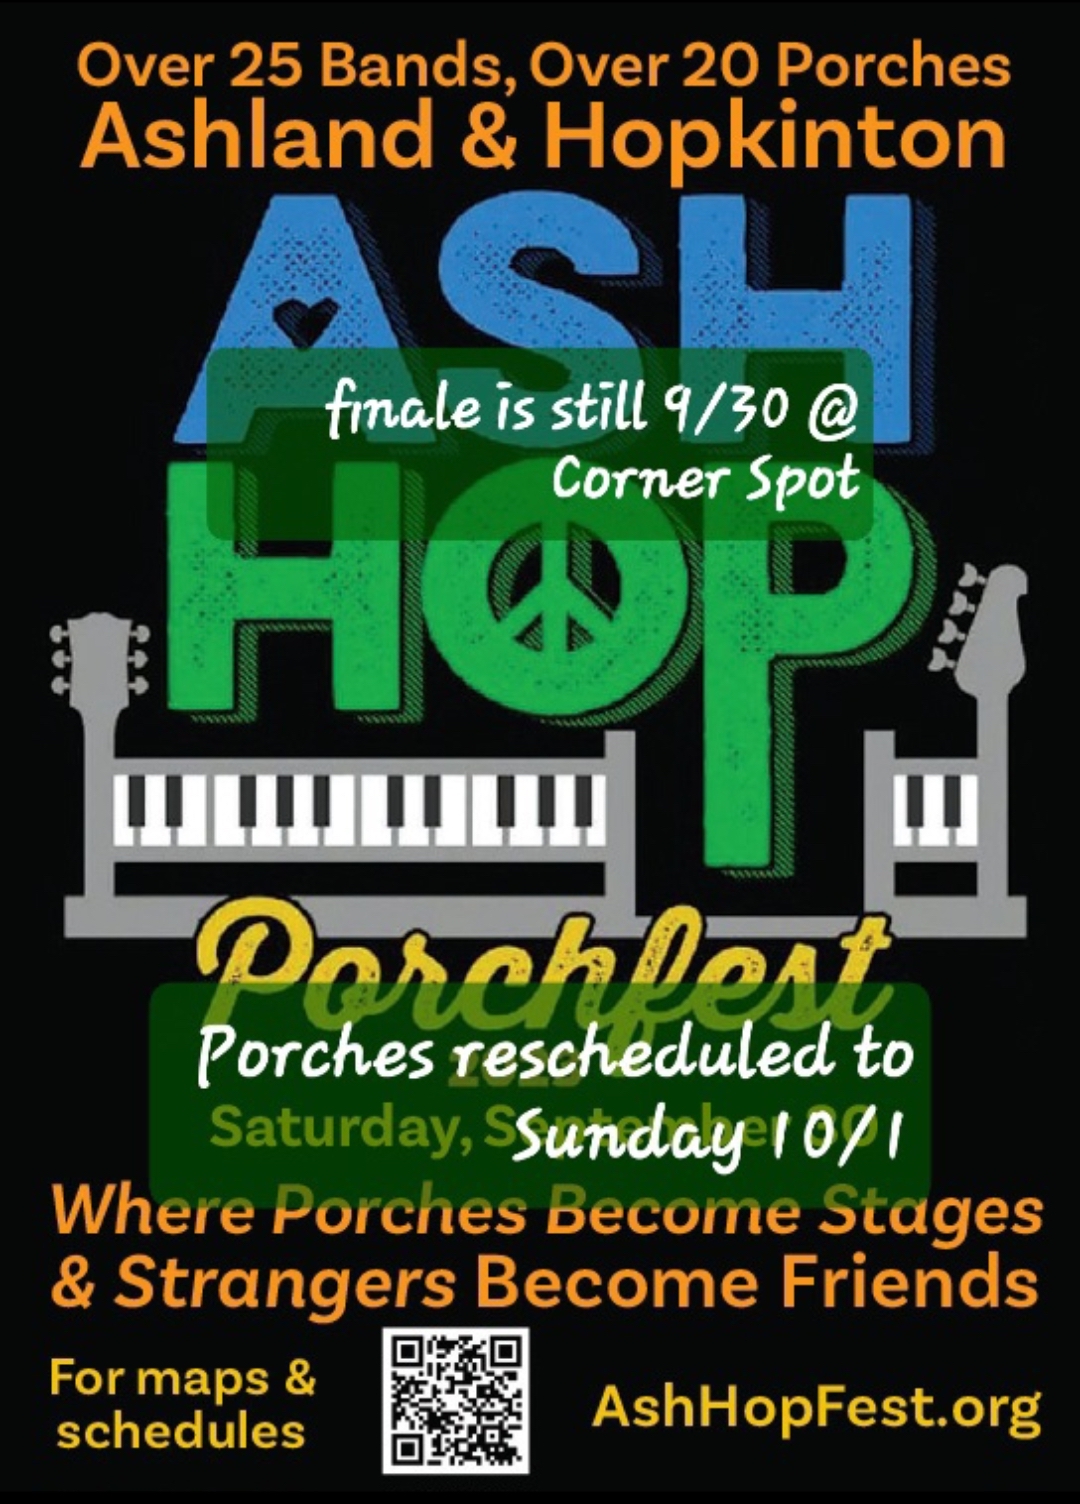 Ash-Hop Porchfest pushed back to Sunday due to rain